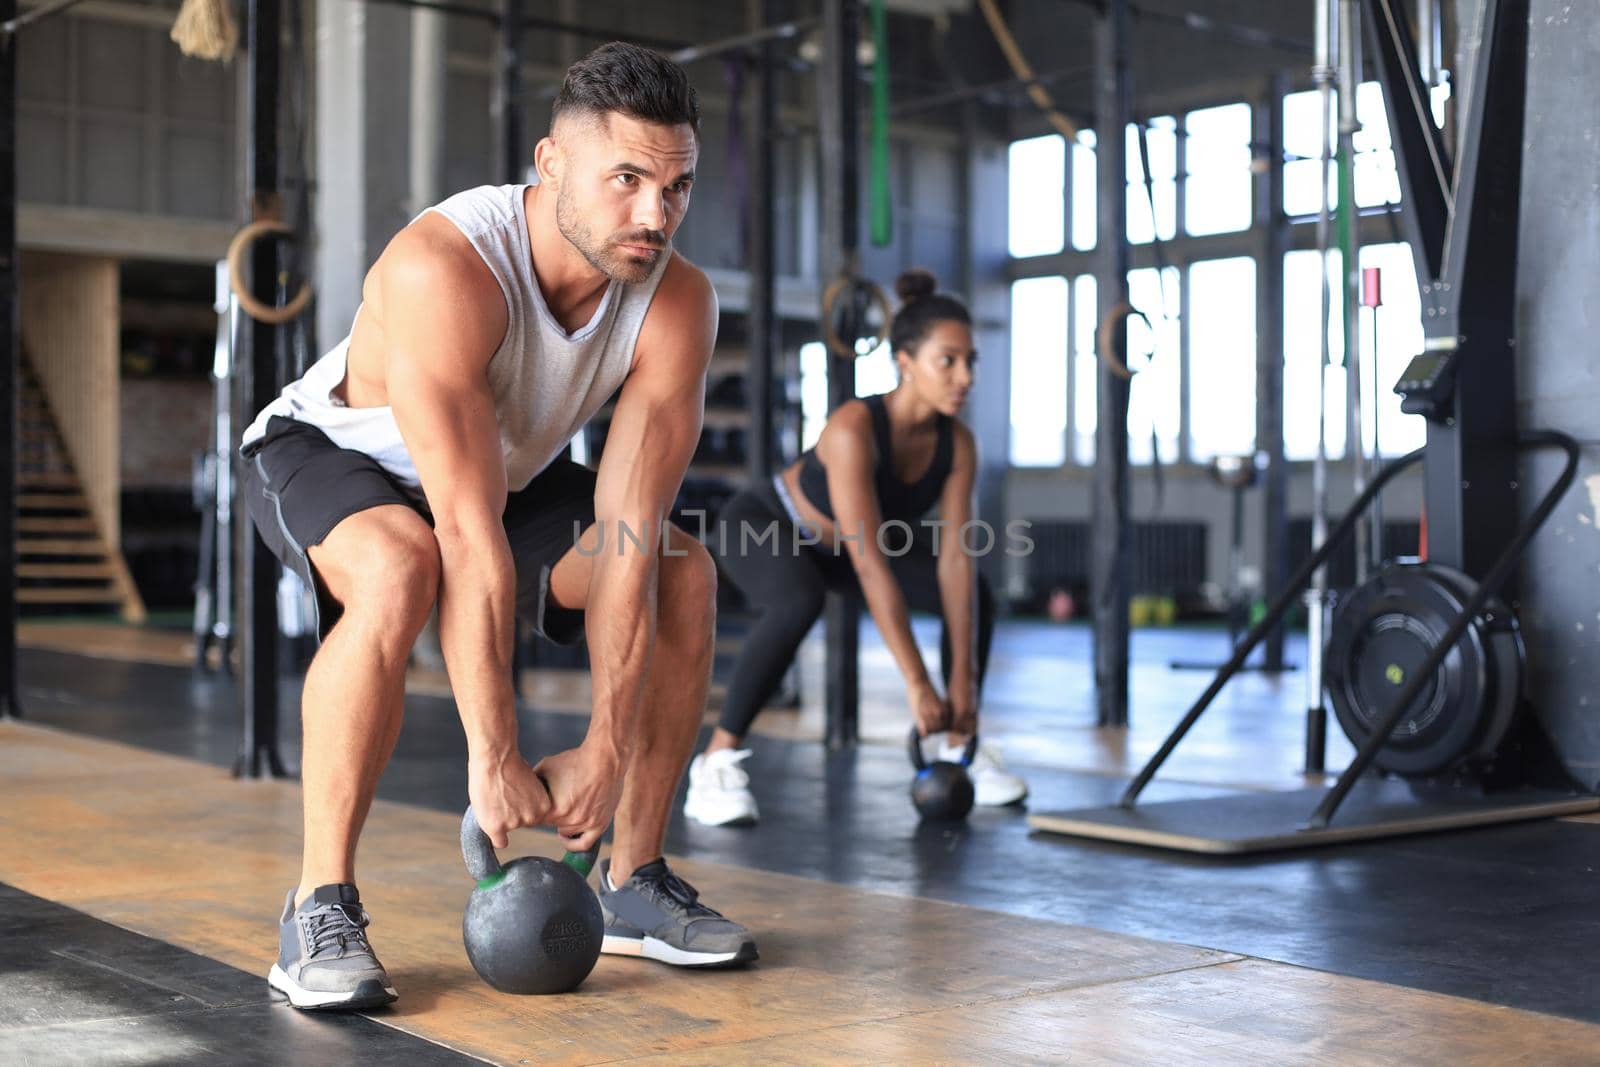 Fit and muscular couple focused on lifting a dumbbell during an exercise class in a gym